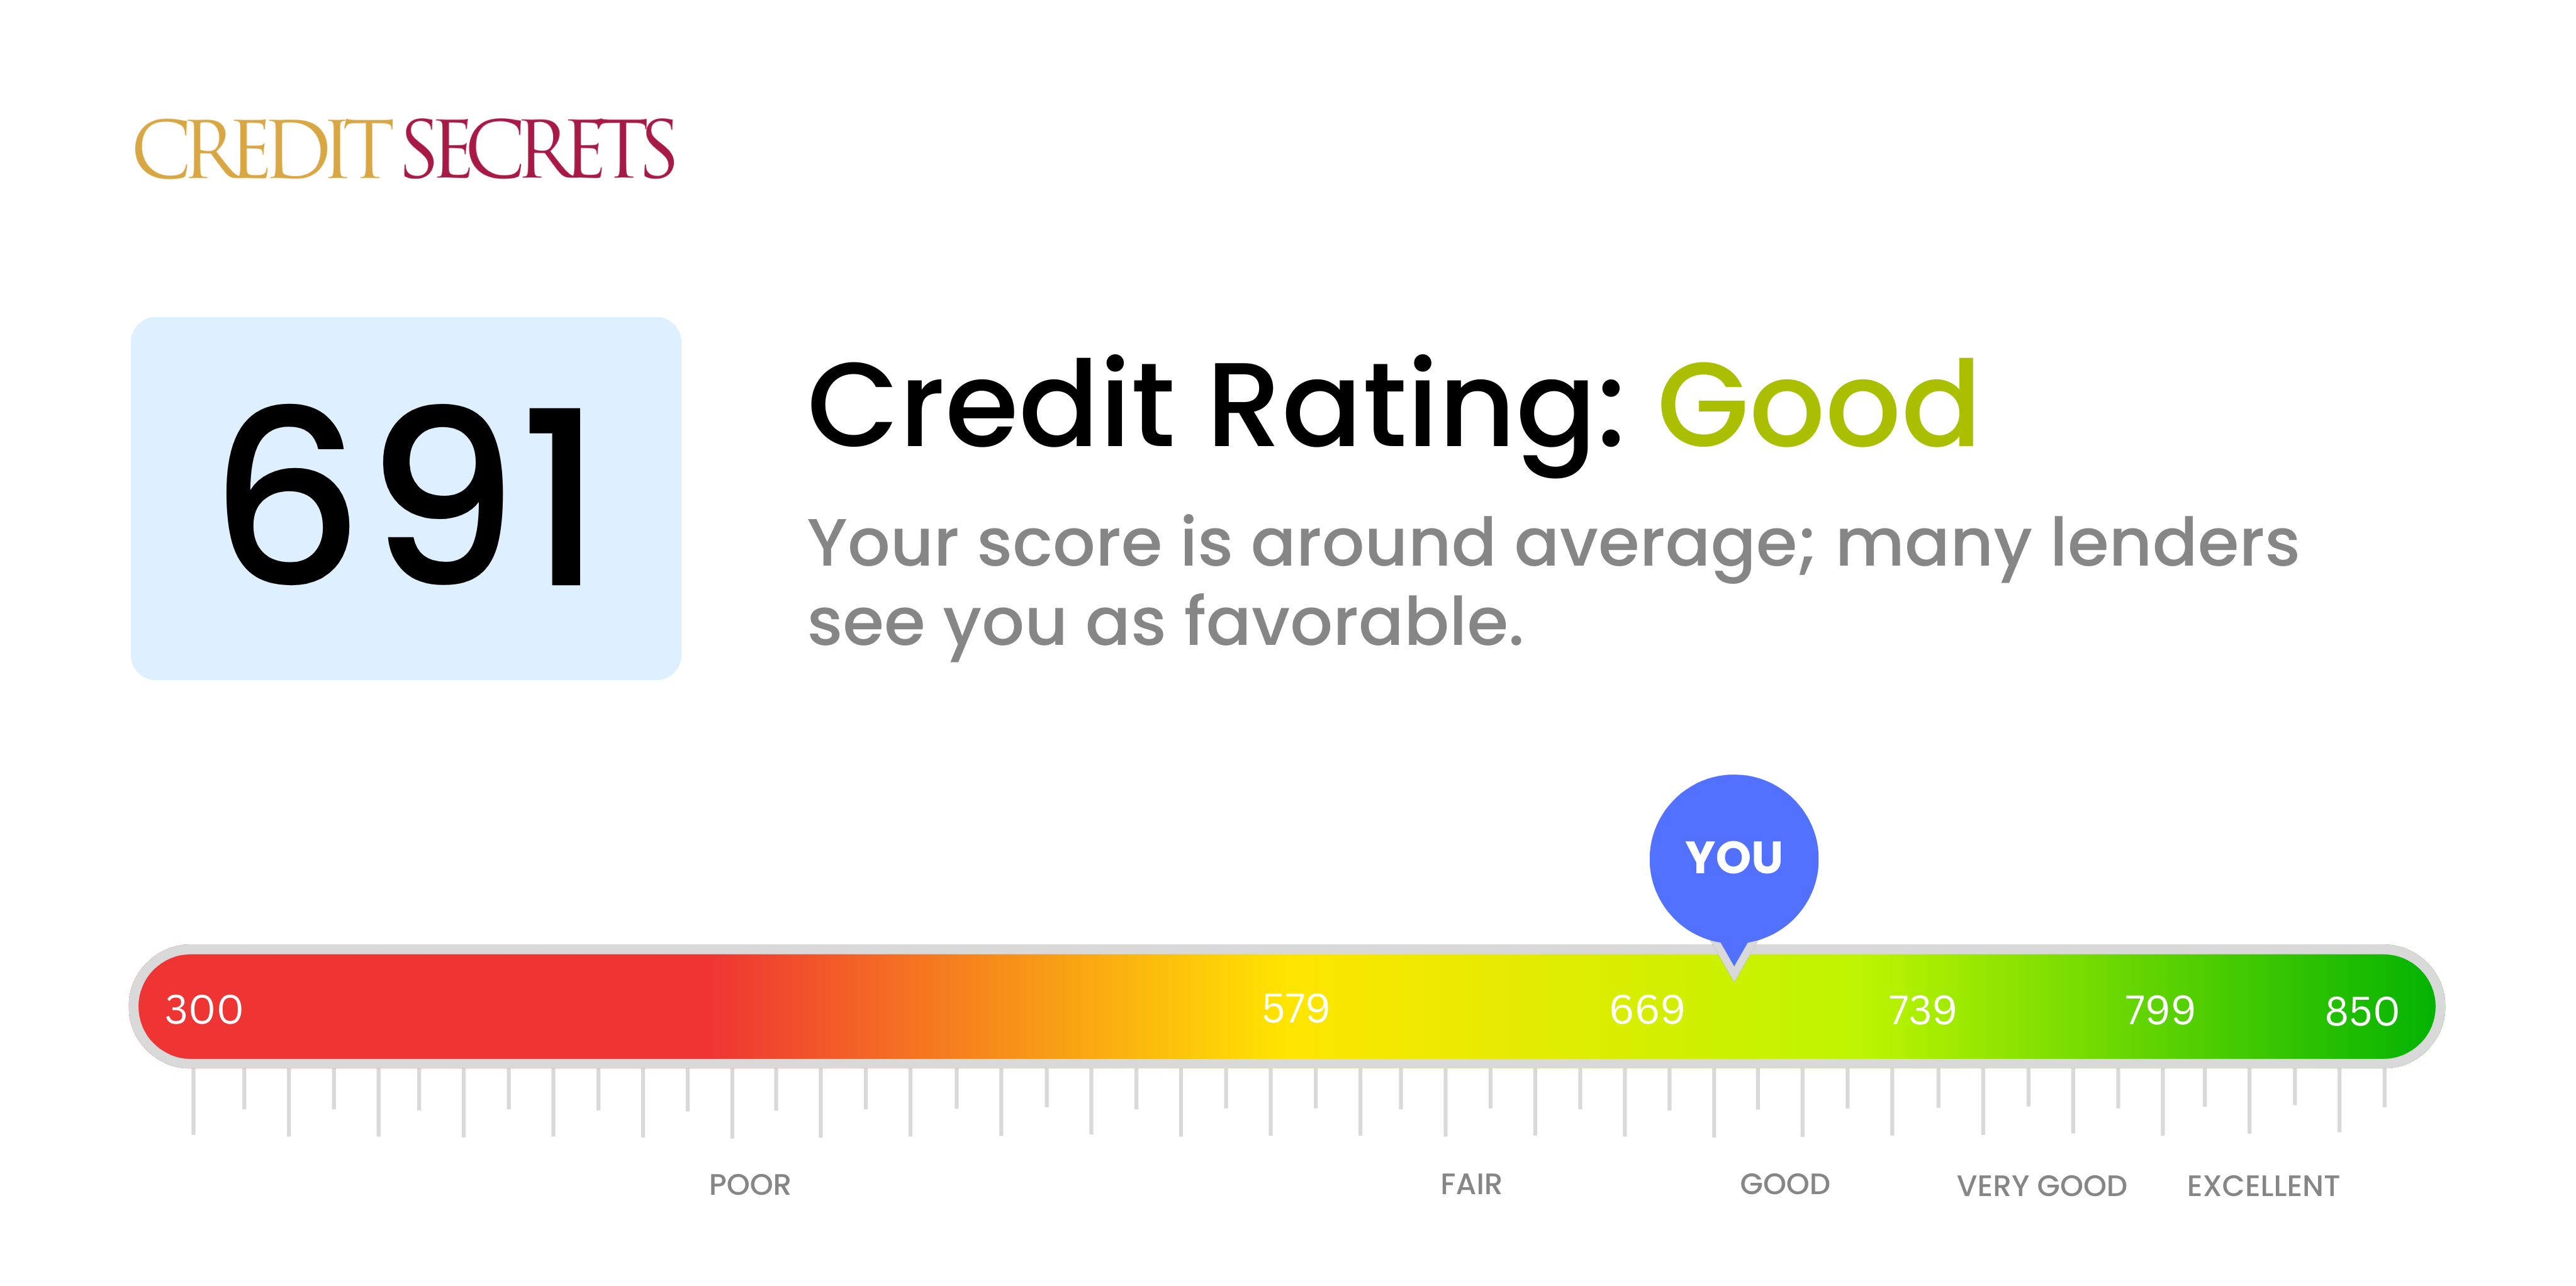 Is 691 a good credit score?